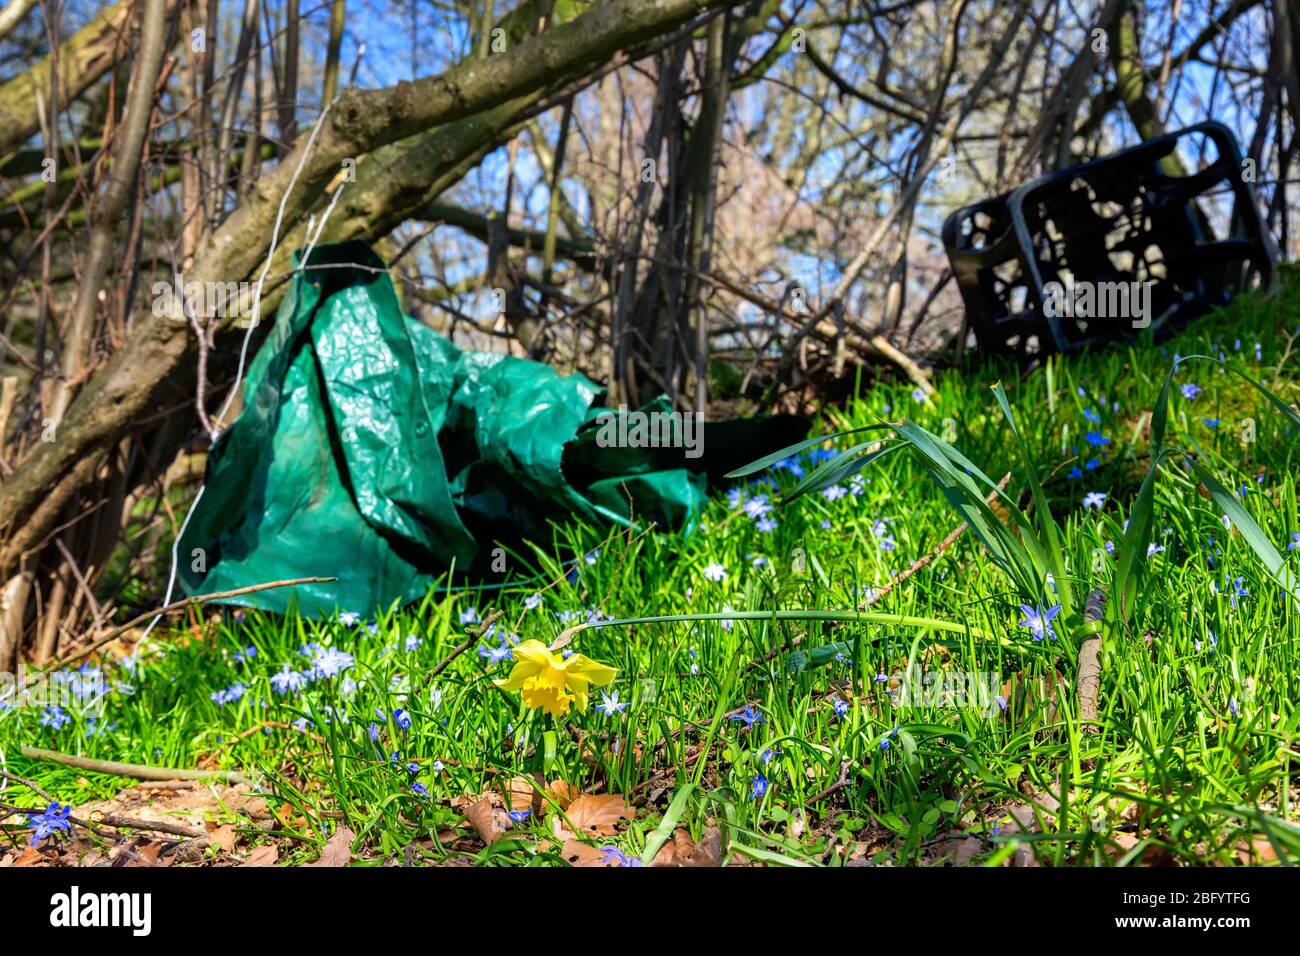 Scilla luciliae or glory-of-the-snow and narcissus pseudonarcissus or wild daffodil or lent lily growing next to plastic waste on a covered landfill i Stock Photo